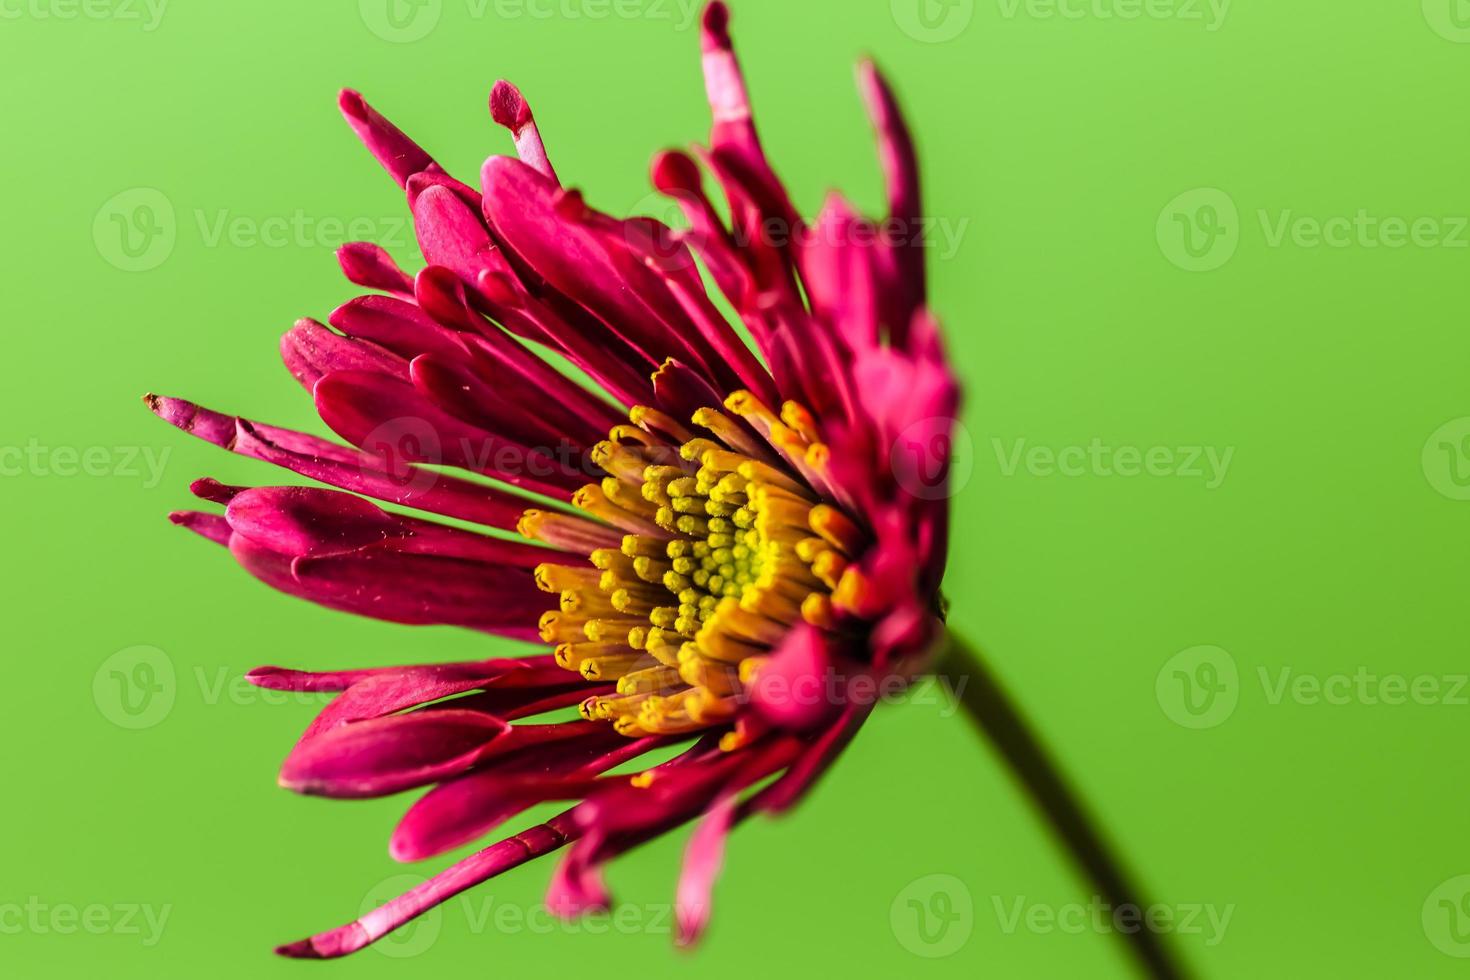 An oblique close up of a red Florist's Daisy with yellow center photo